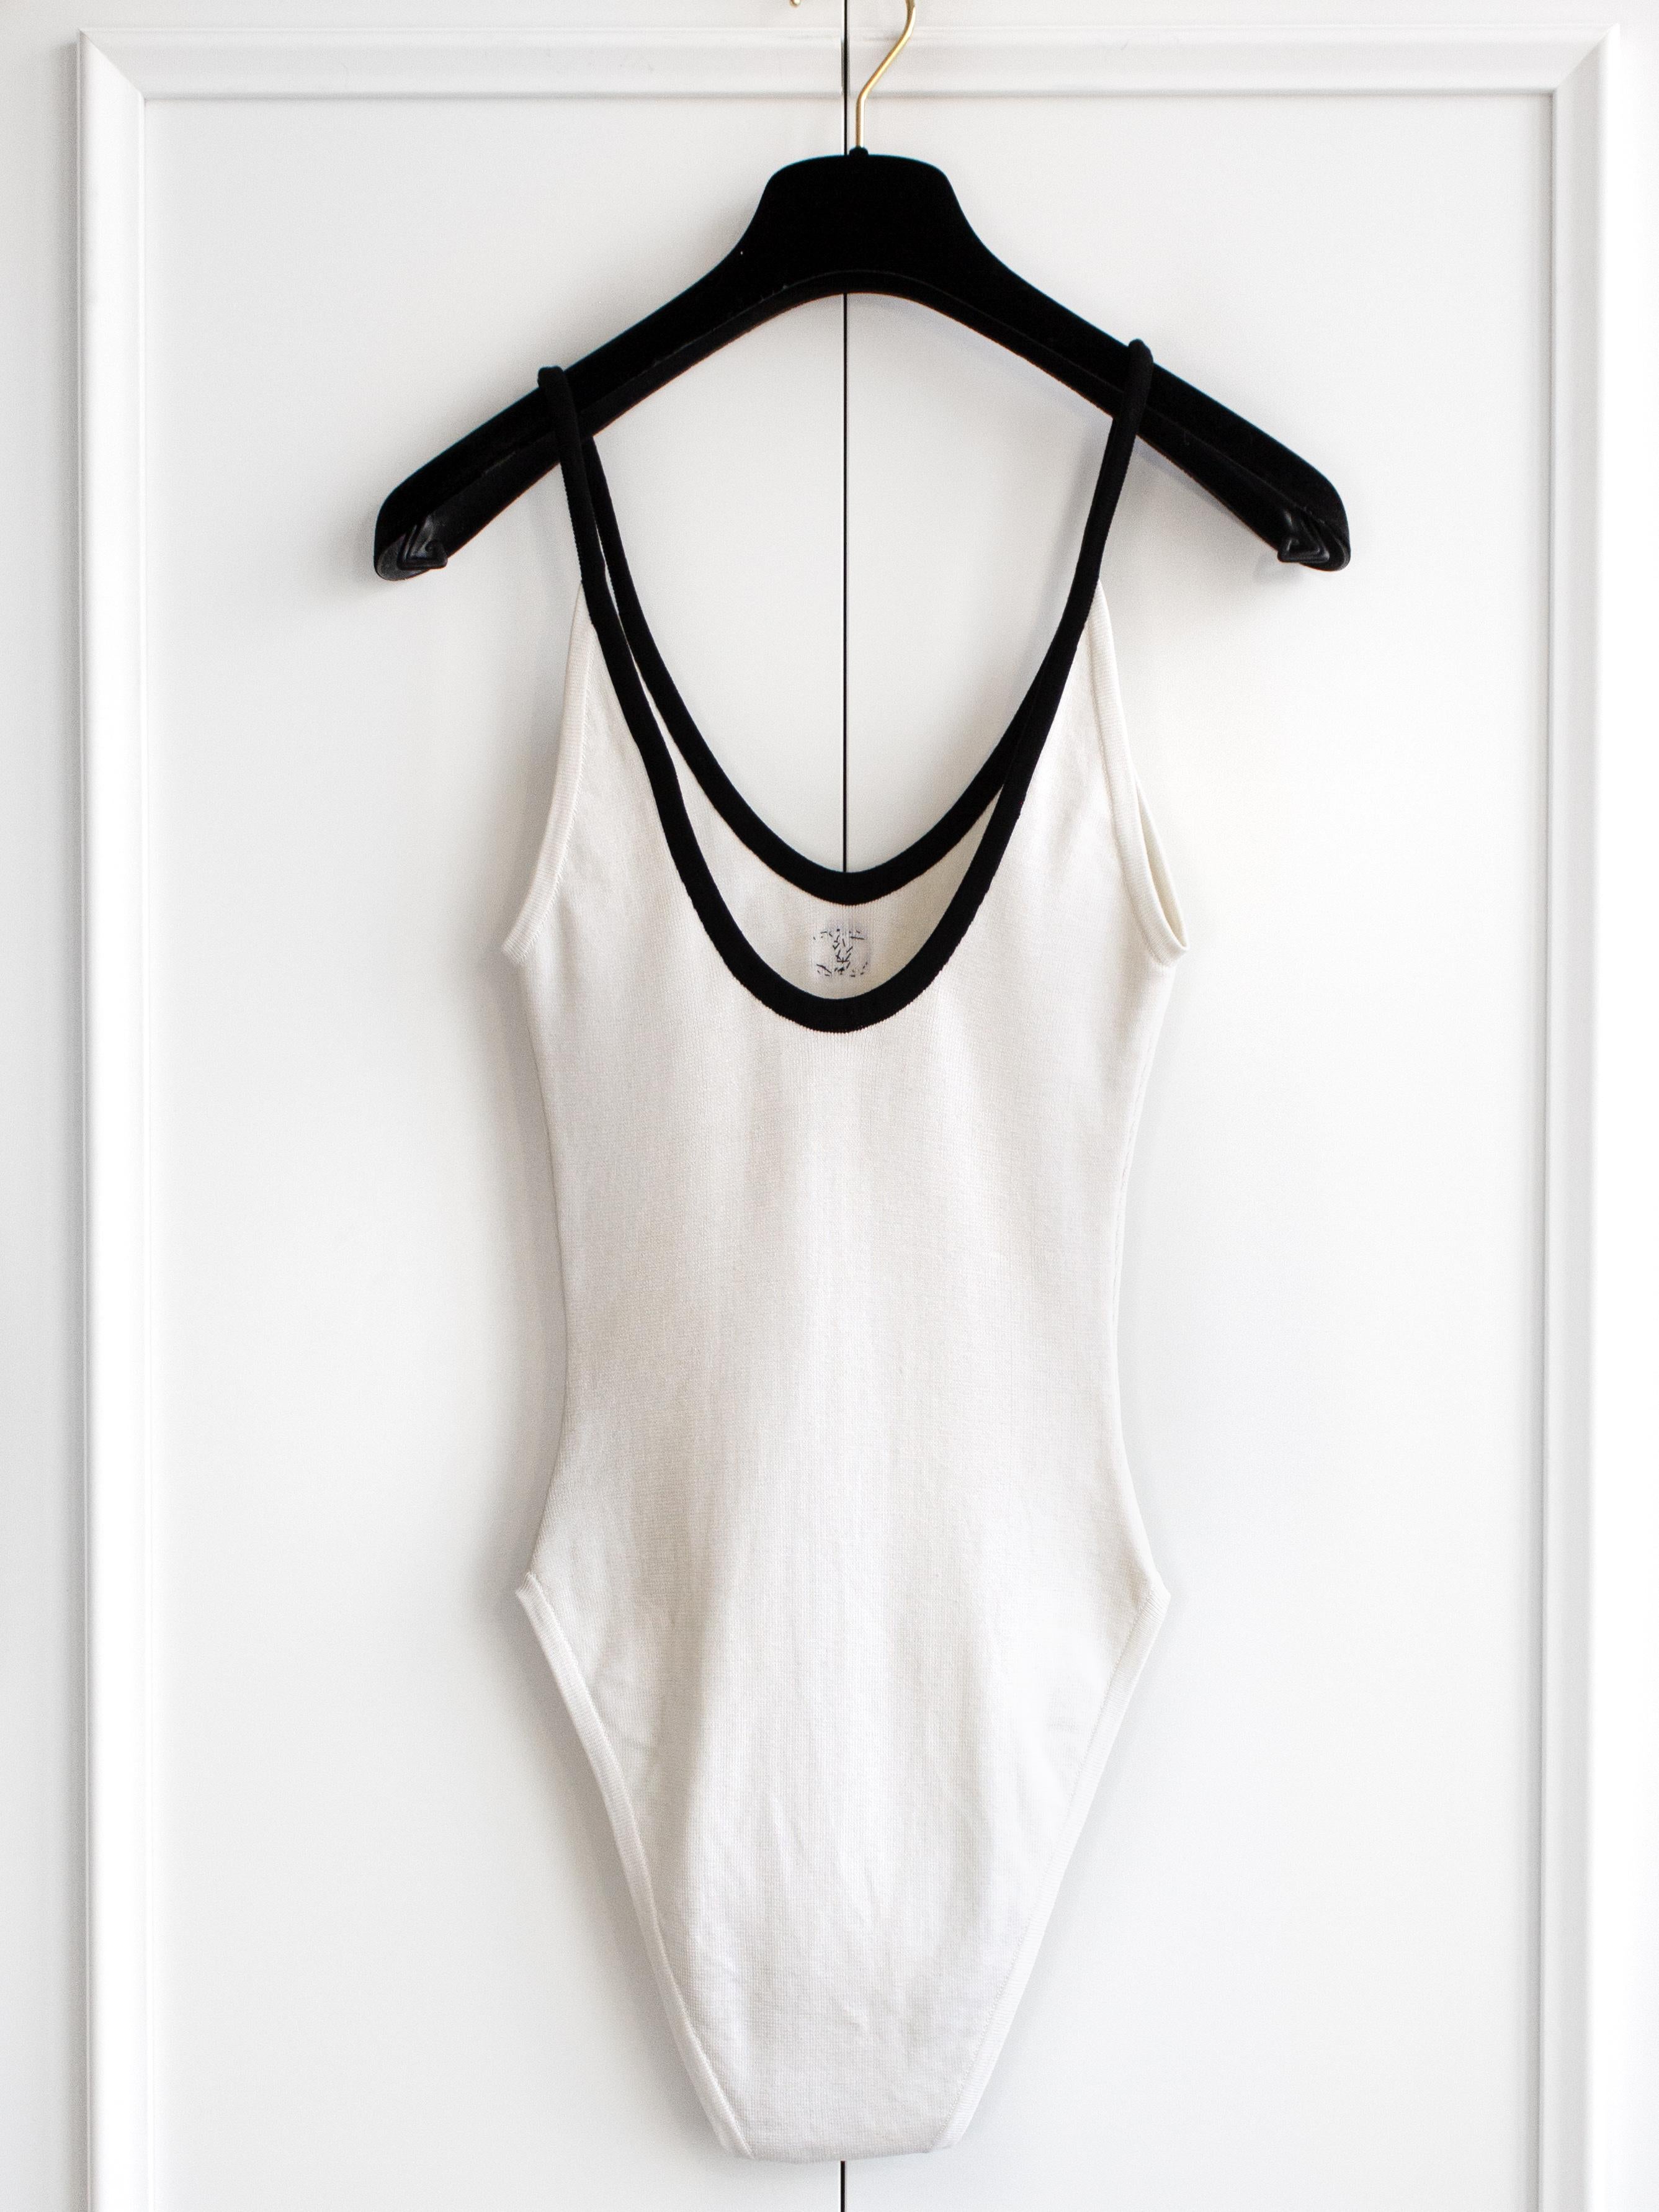 A scoop-neck white cotton bodysuit with a contrasting black trim and CC logo from Chanel Spring/Summer 1994 collection. Good condition, no visible flaws when worn but has stains on a crotch. The size and composition label is missing, best fits FR34.